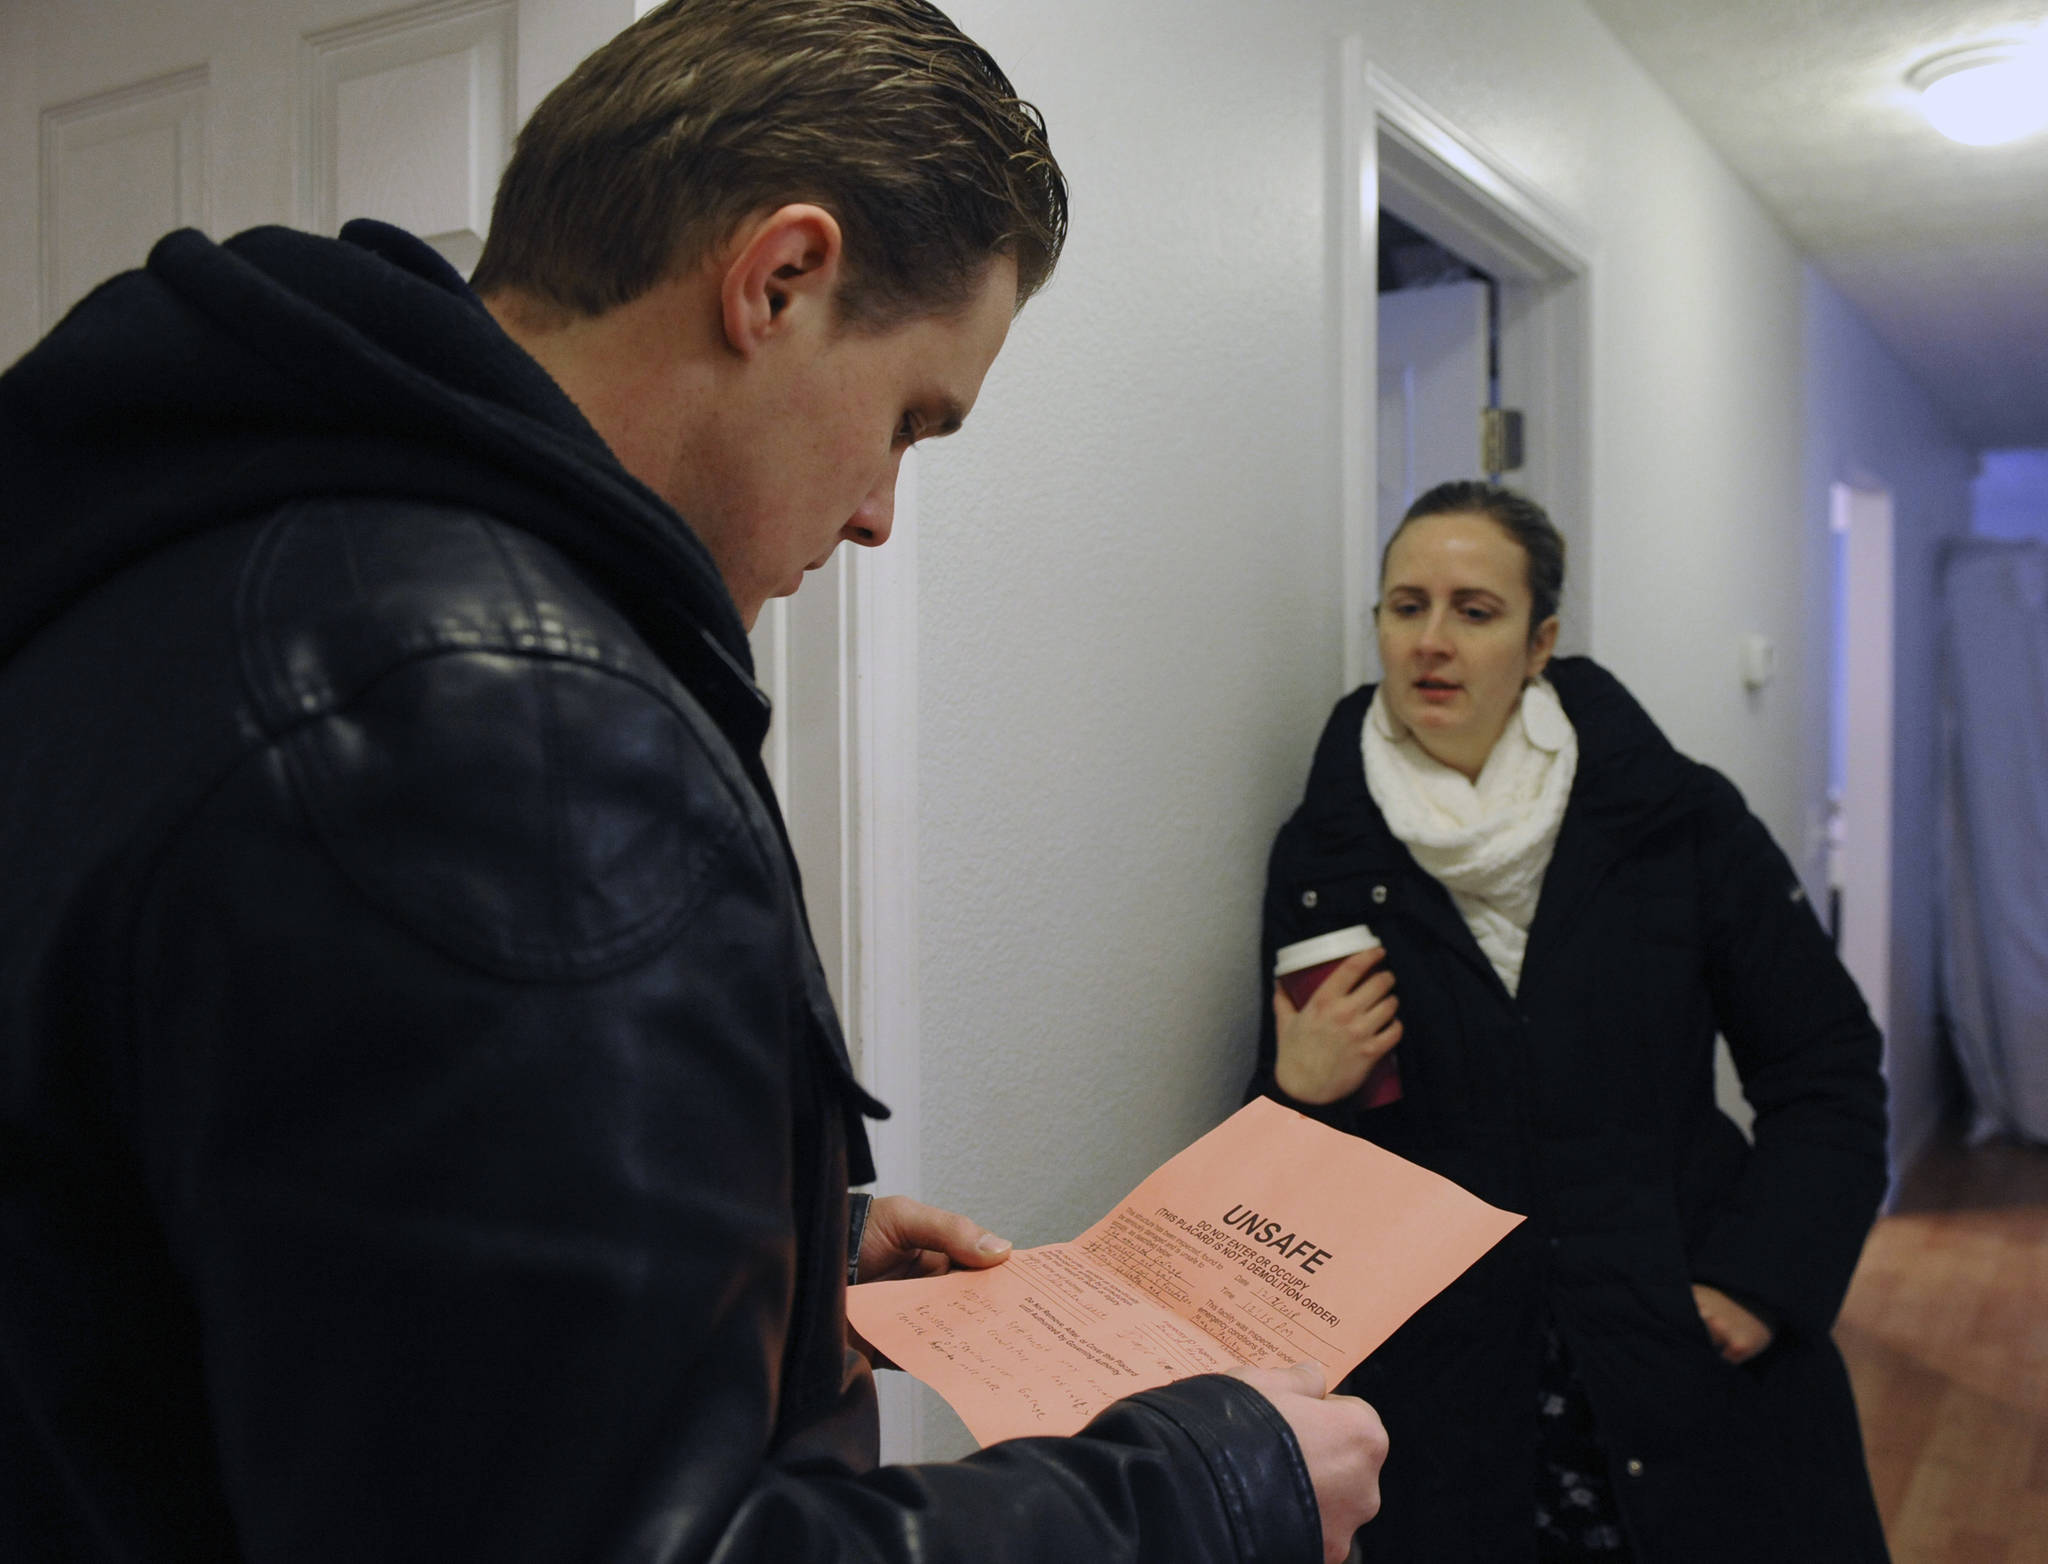 In this Dec. 13, 2018 photo, Albert Schoonbeek and Candice Roberson talk about the Unsafe tag their home received after an engineer inspected their home in East Anchorage, Alaska, after the earthquake. Schoonbeek and Roberson are among an unknown number of people displaced by the Nov. 30 earthquake. (Anne Raup | Anchorage Daily News via the Associated Press)